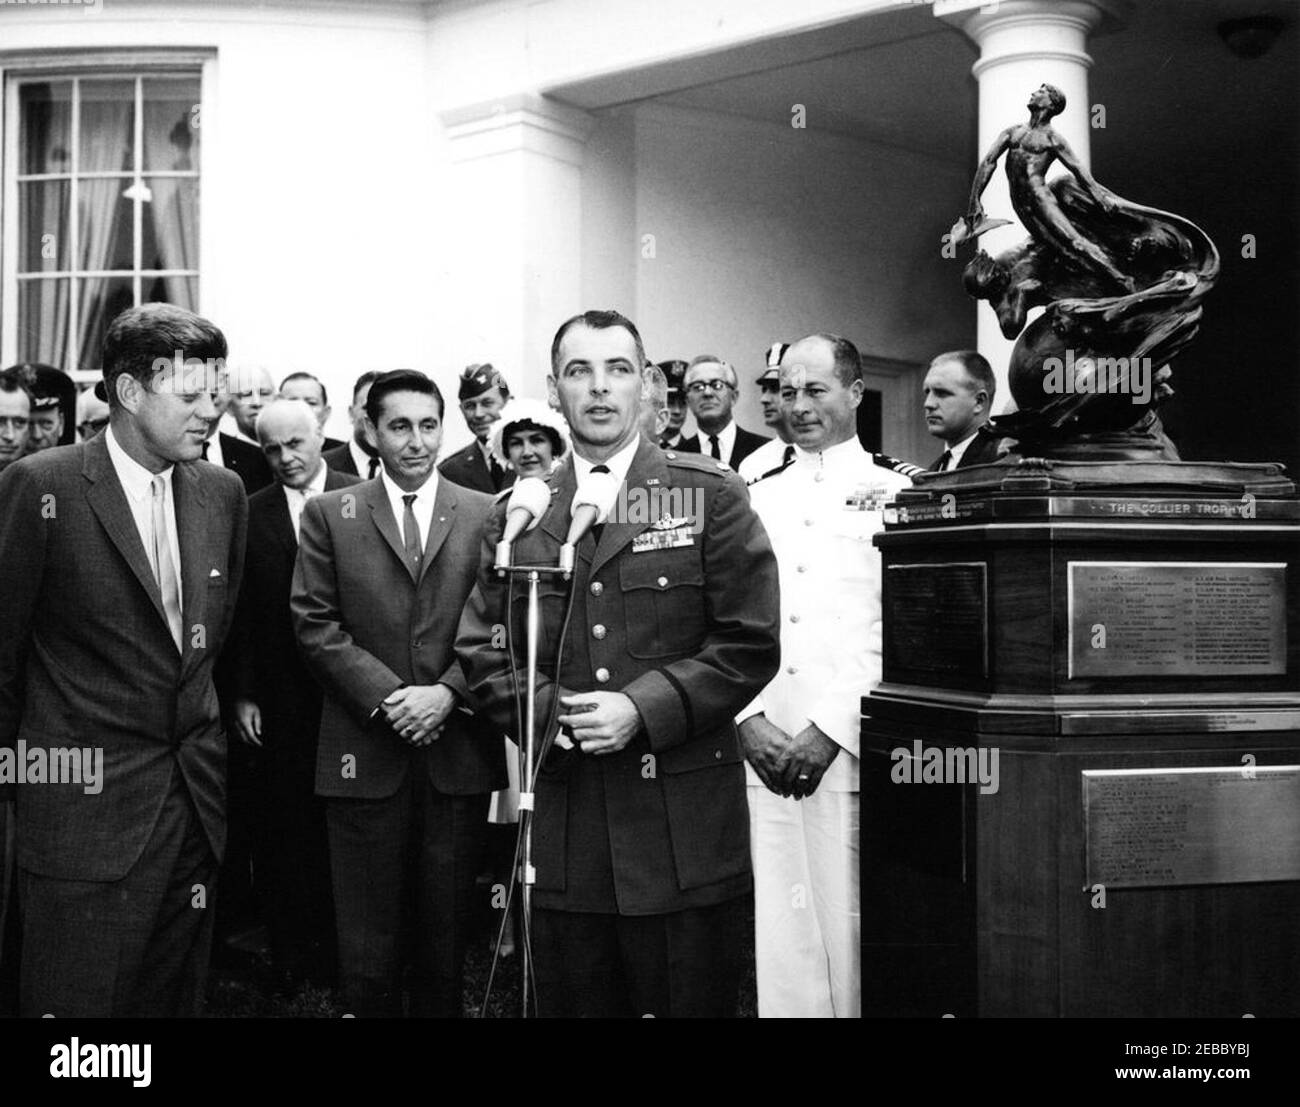 Presentation of the 1961 Collier Trophy, 11:30AM. Major Robert M. White (U.S. Air Force) delivers remarks upon receiving the 1961 Robert J. Collier Trophy; President John F. Kennedy presented the trophy to four X-15 pilots on behalf of the National Aeronautic Association (NAA). Also pictured: trophy recipients, A. Scott Crossfield (North American Aviation) and Commander Forrest S. Petersen (U.S. Navy); General Omar Bradley; Secretary of the Air Force, Eugene M. Zuckert; White House Secret Service agent, Frank Yeager. West Wing Lawn, White House, Washington, D.C. Stock Photo